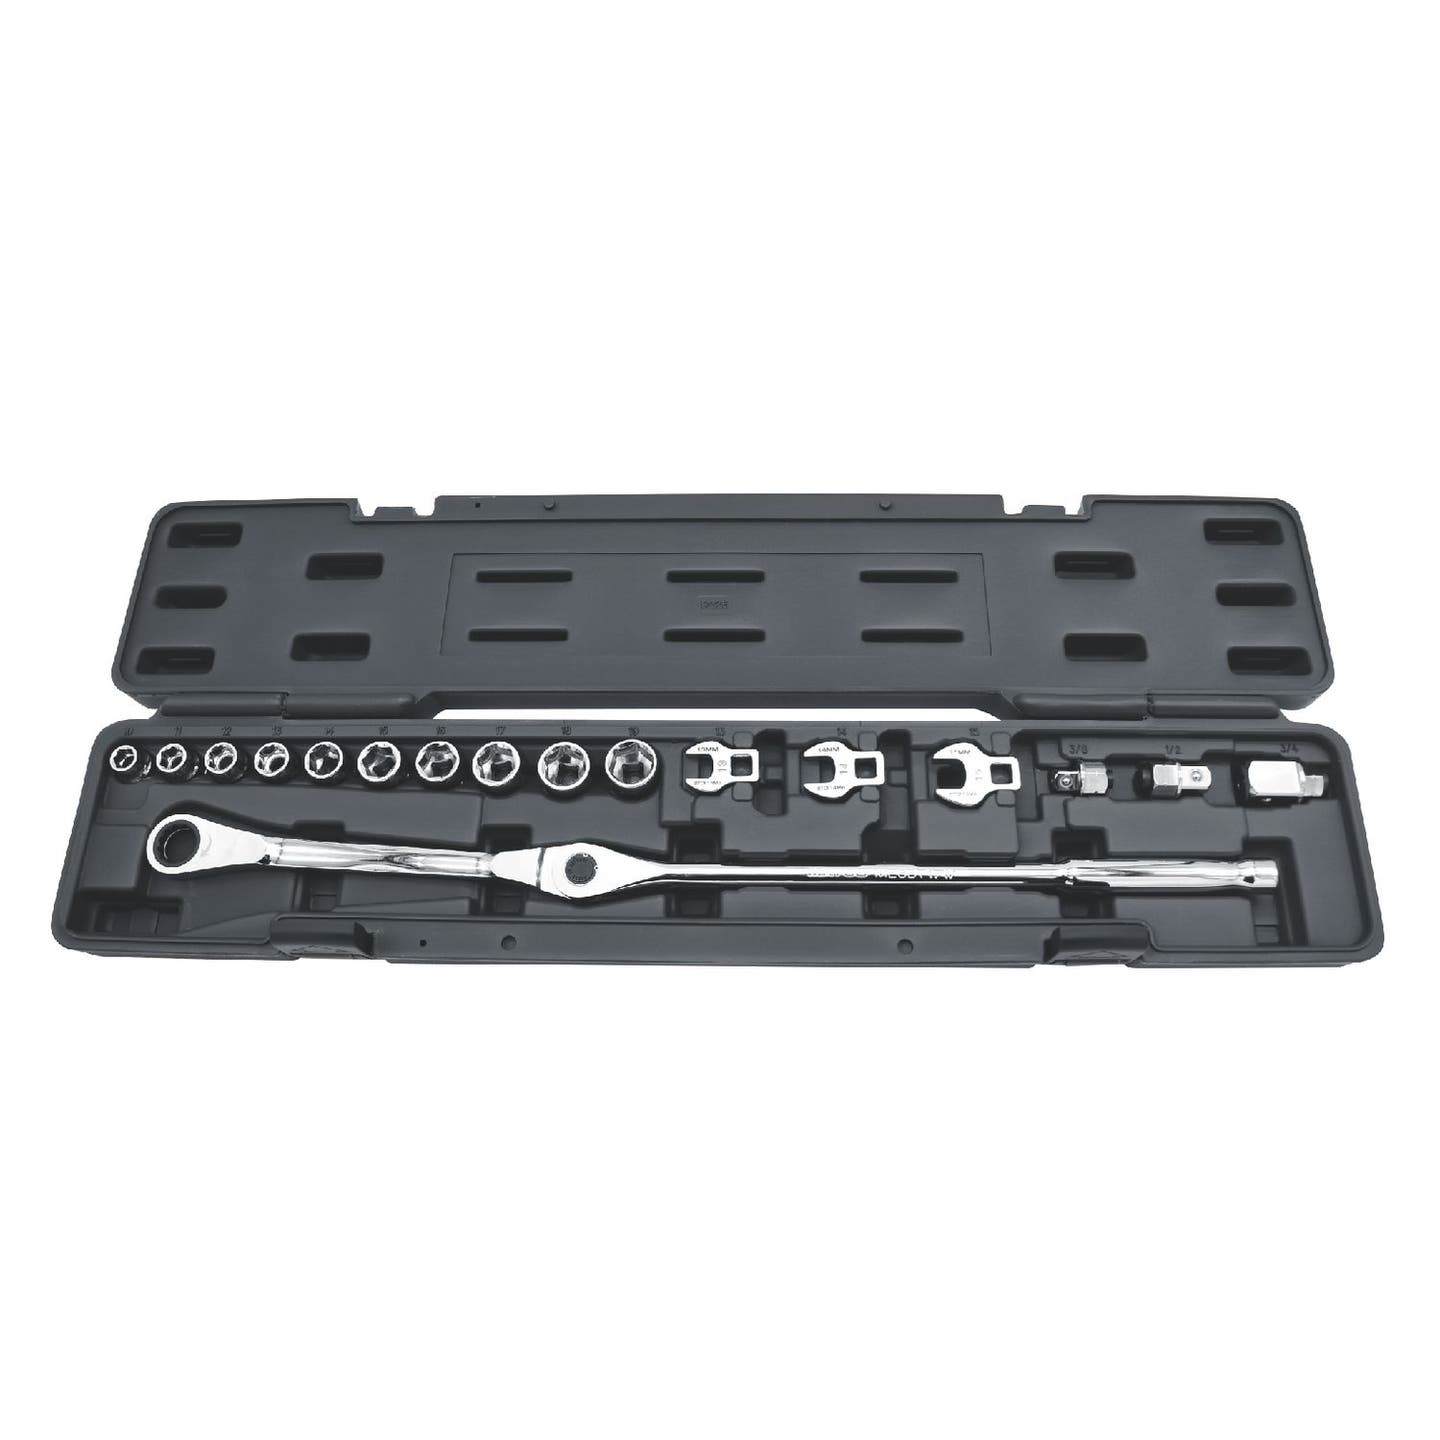 EXTENDED REACH RATCHETING SERPENTINE BELT MASTER TOOL KIT